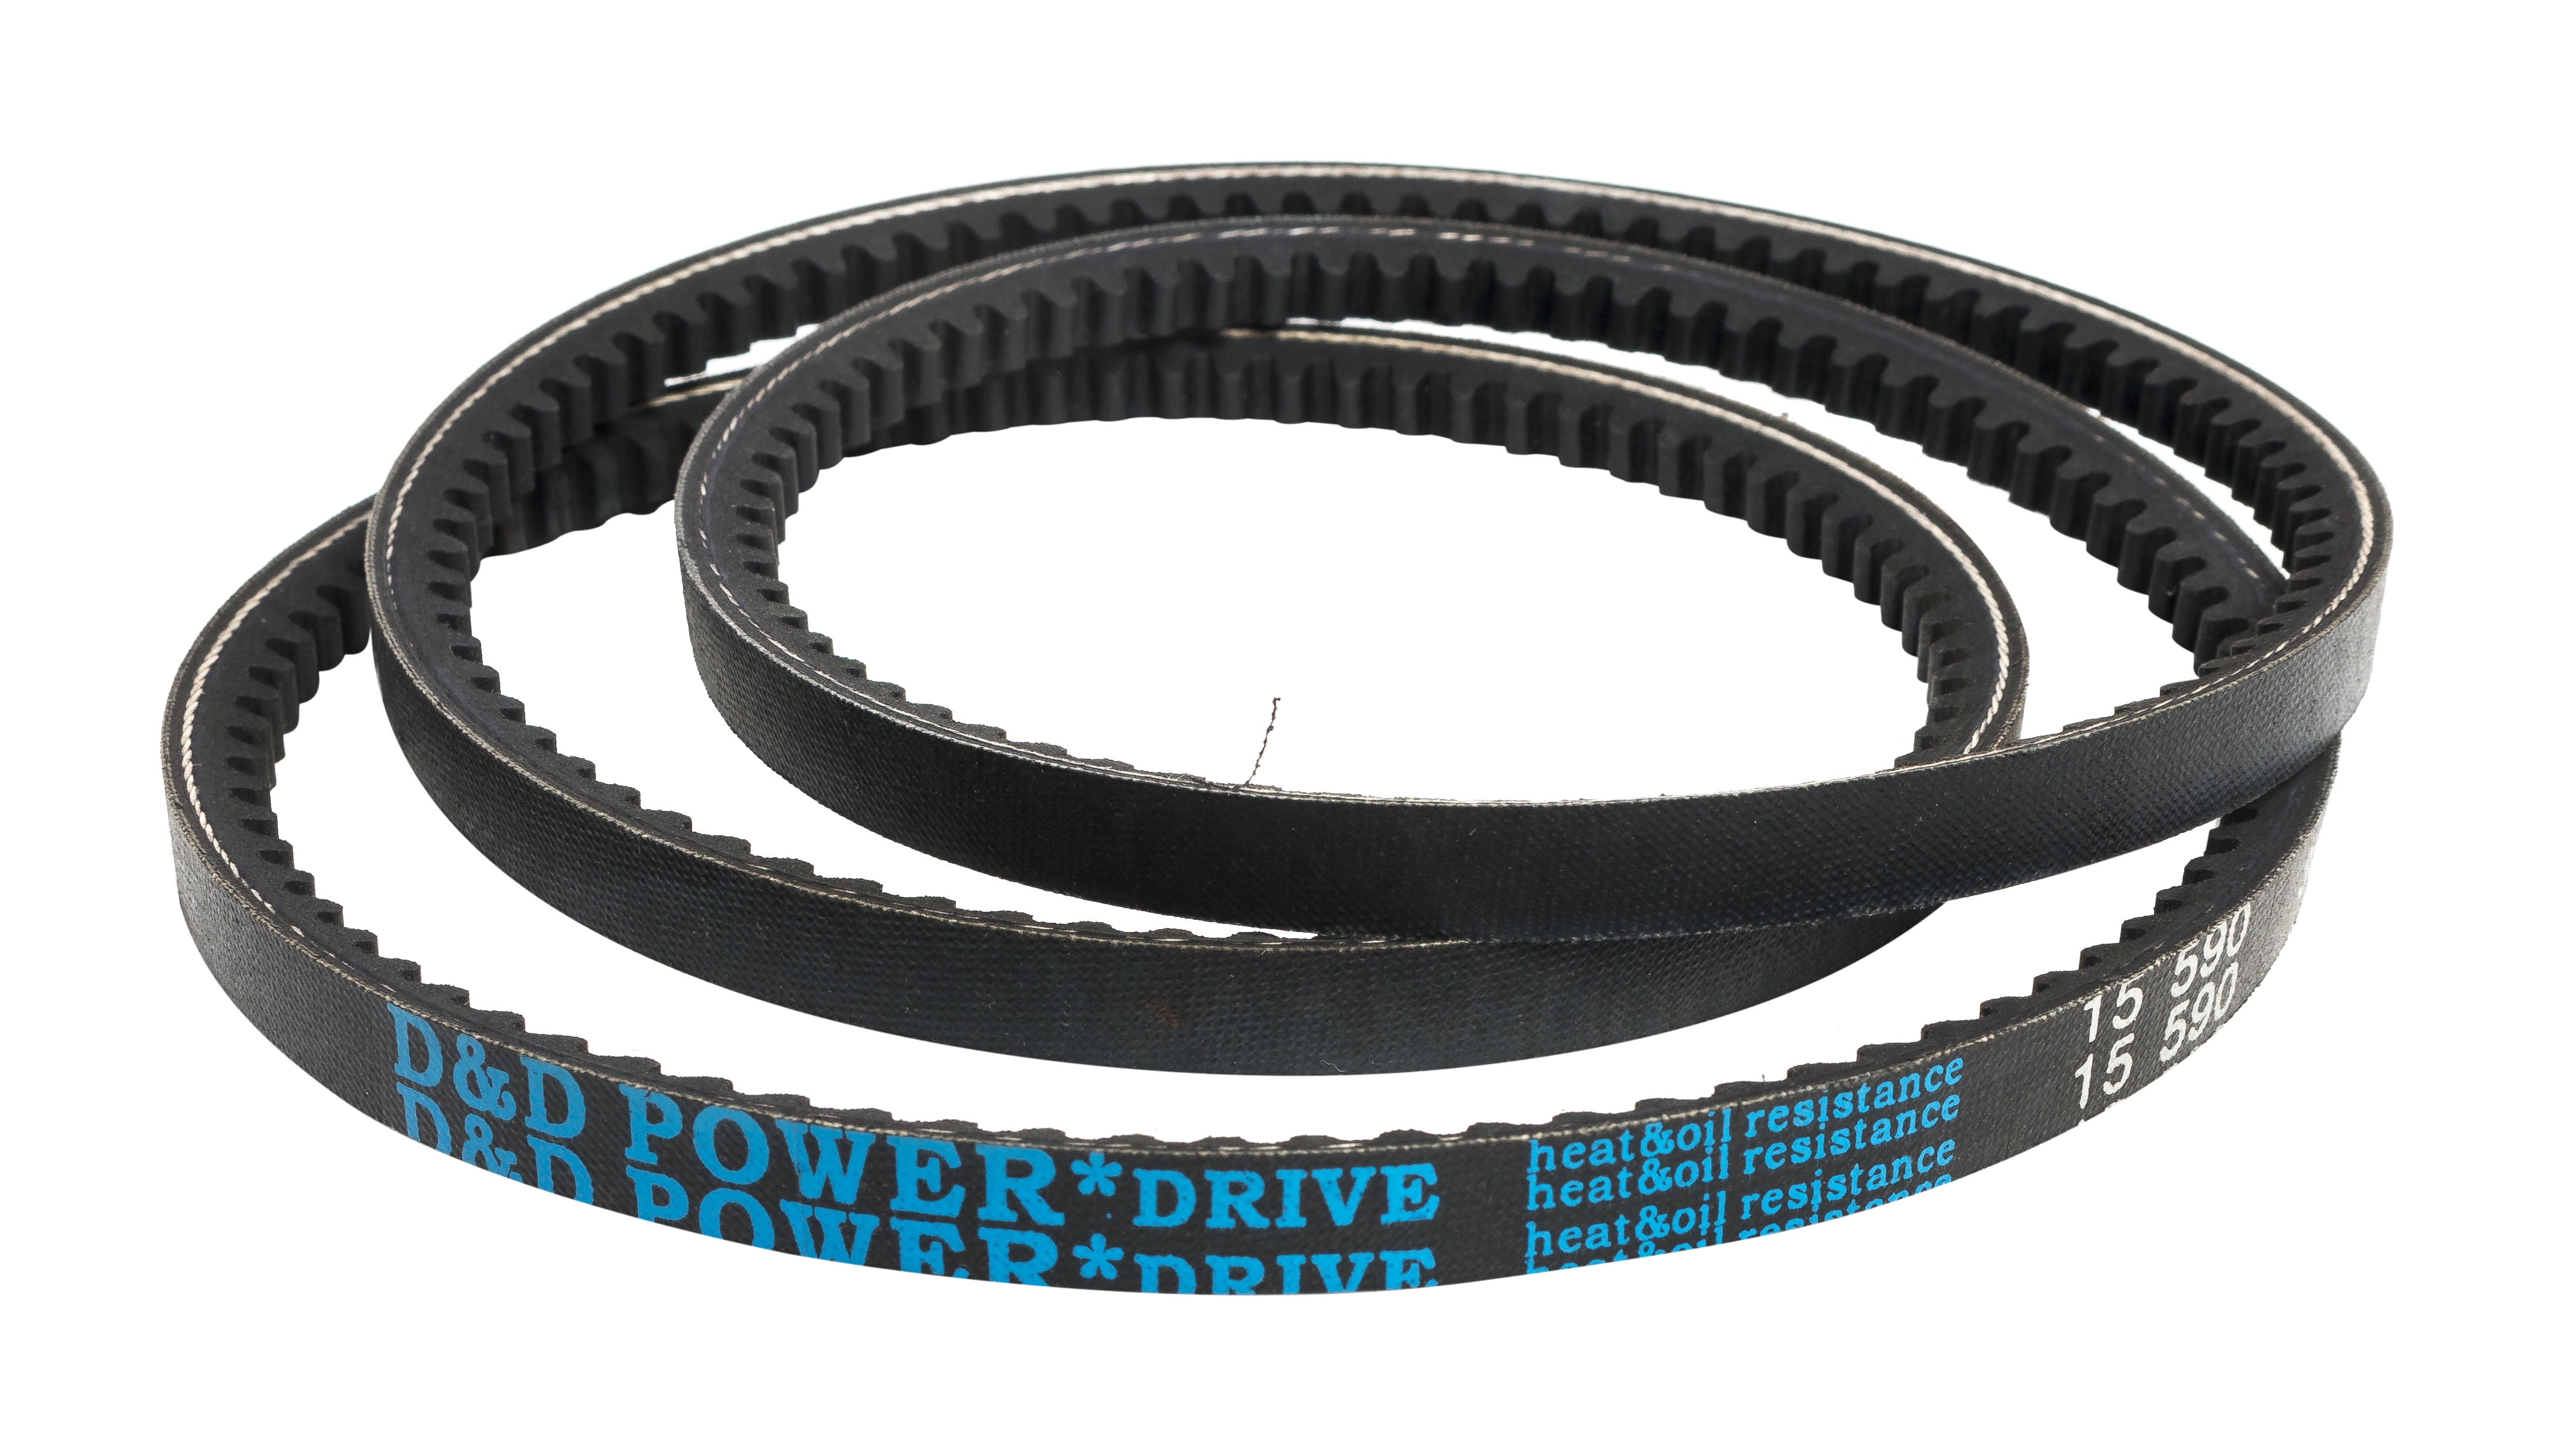 Rubber D&D PowerDrive 15435 Mighty DISTRIBUTING Replacement Belt 1 Band 